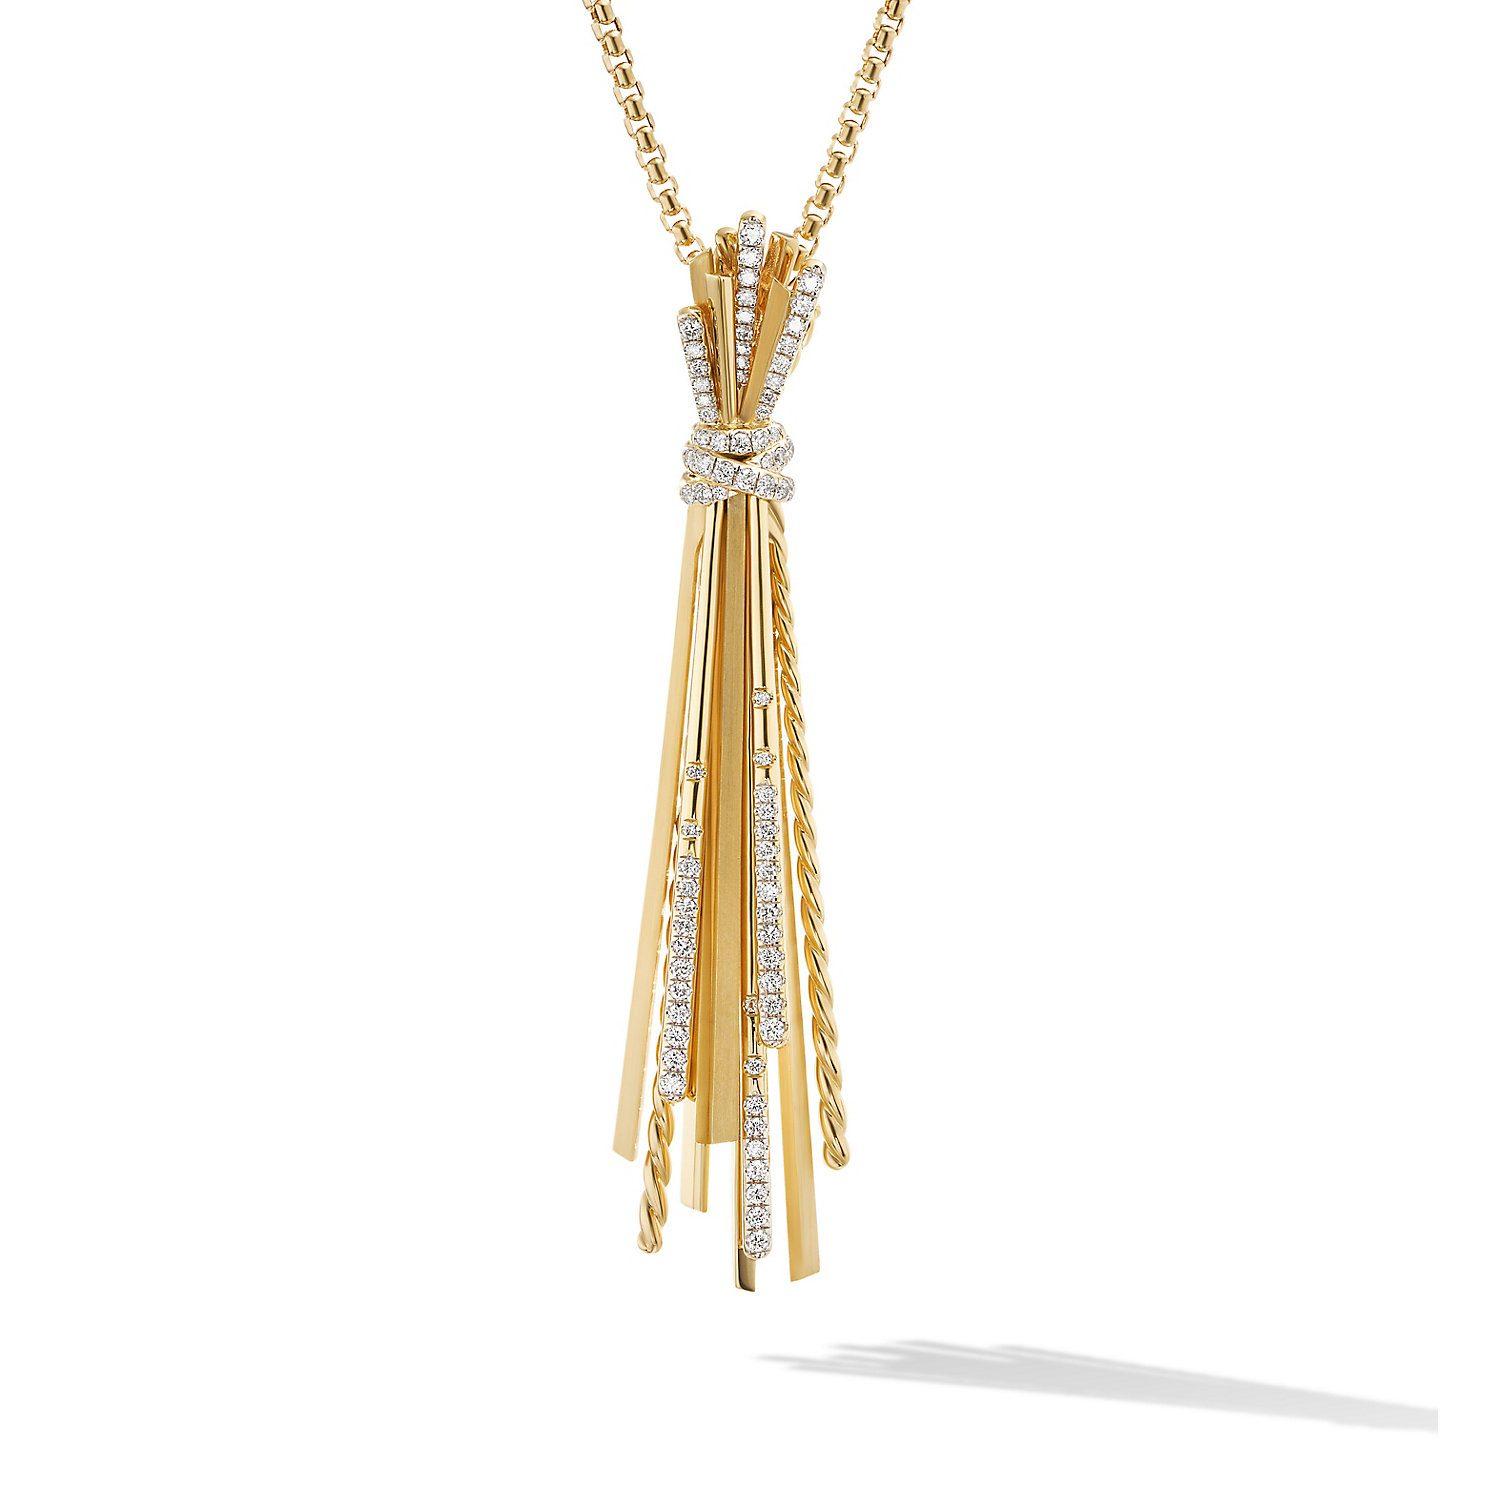 David Yurman Angelika Y Slider Necklace in 18K Yellow Gold with Pave Diamonds 0